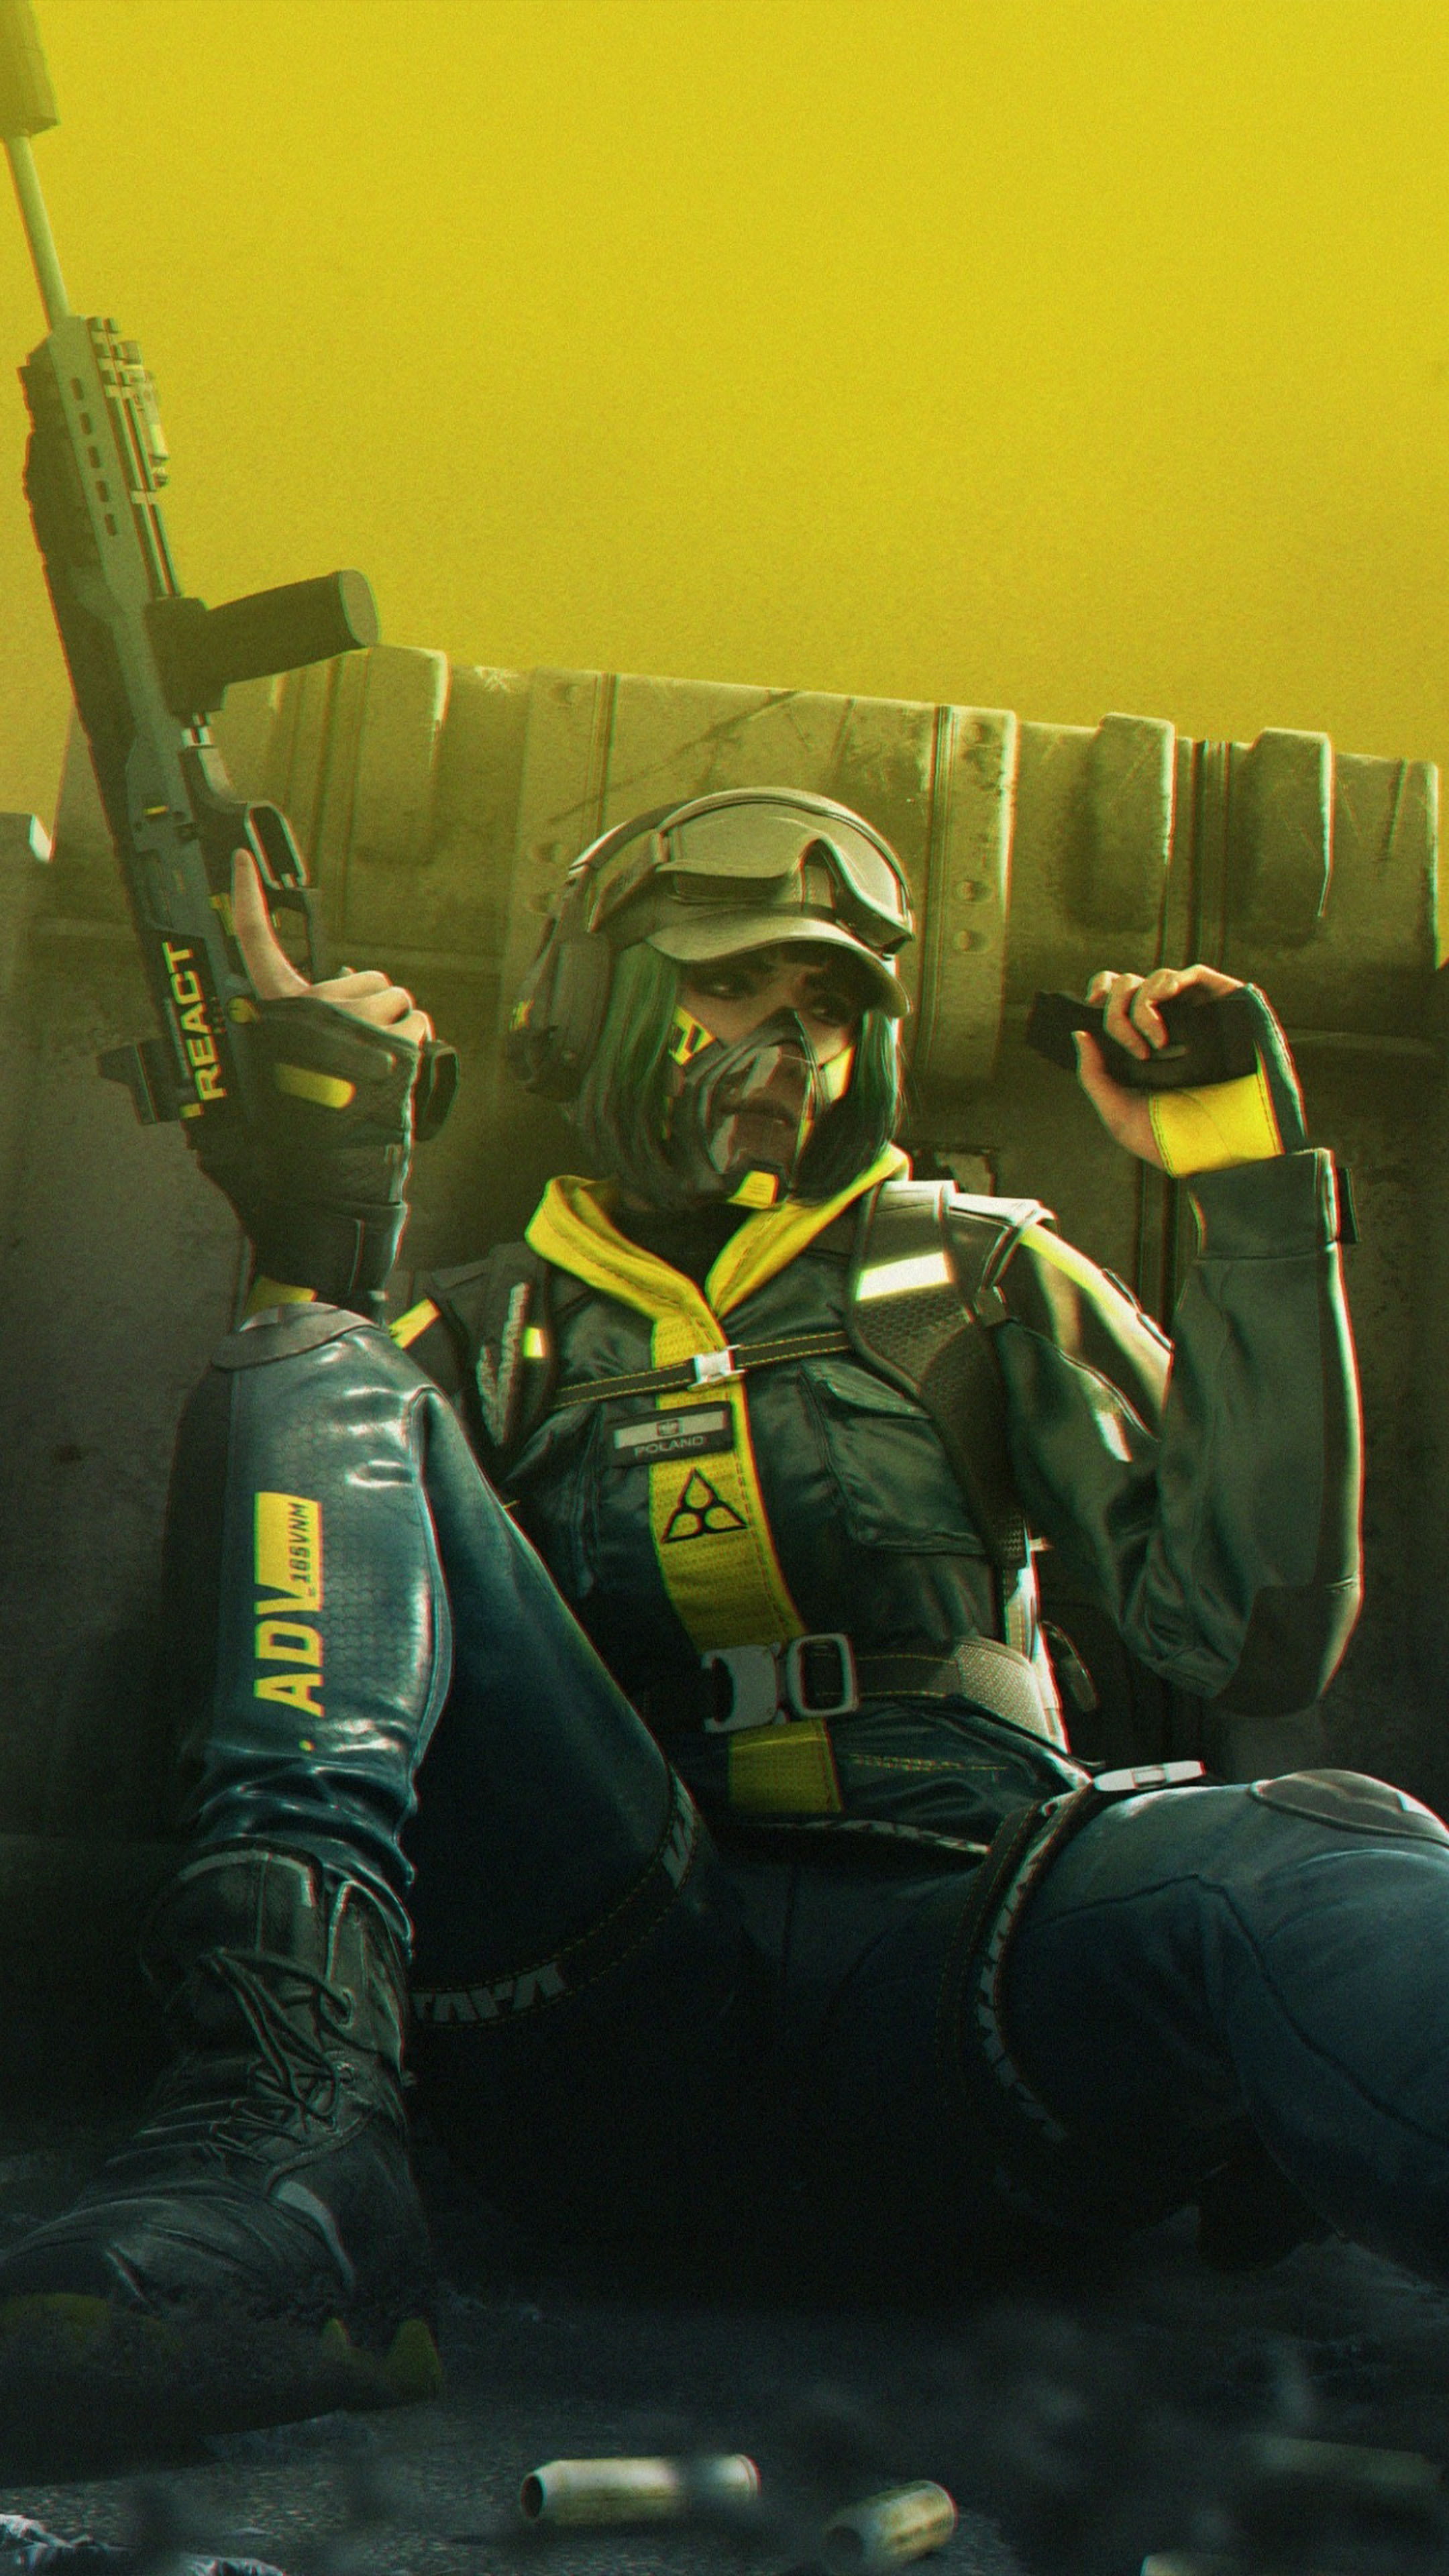 Rainbow Six Extraction: 2022 Game, Rainbow Exogenous Analysis and Containment Team. 2160x3840 4K Background.